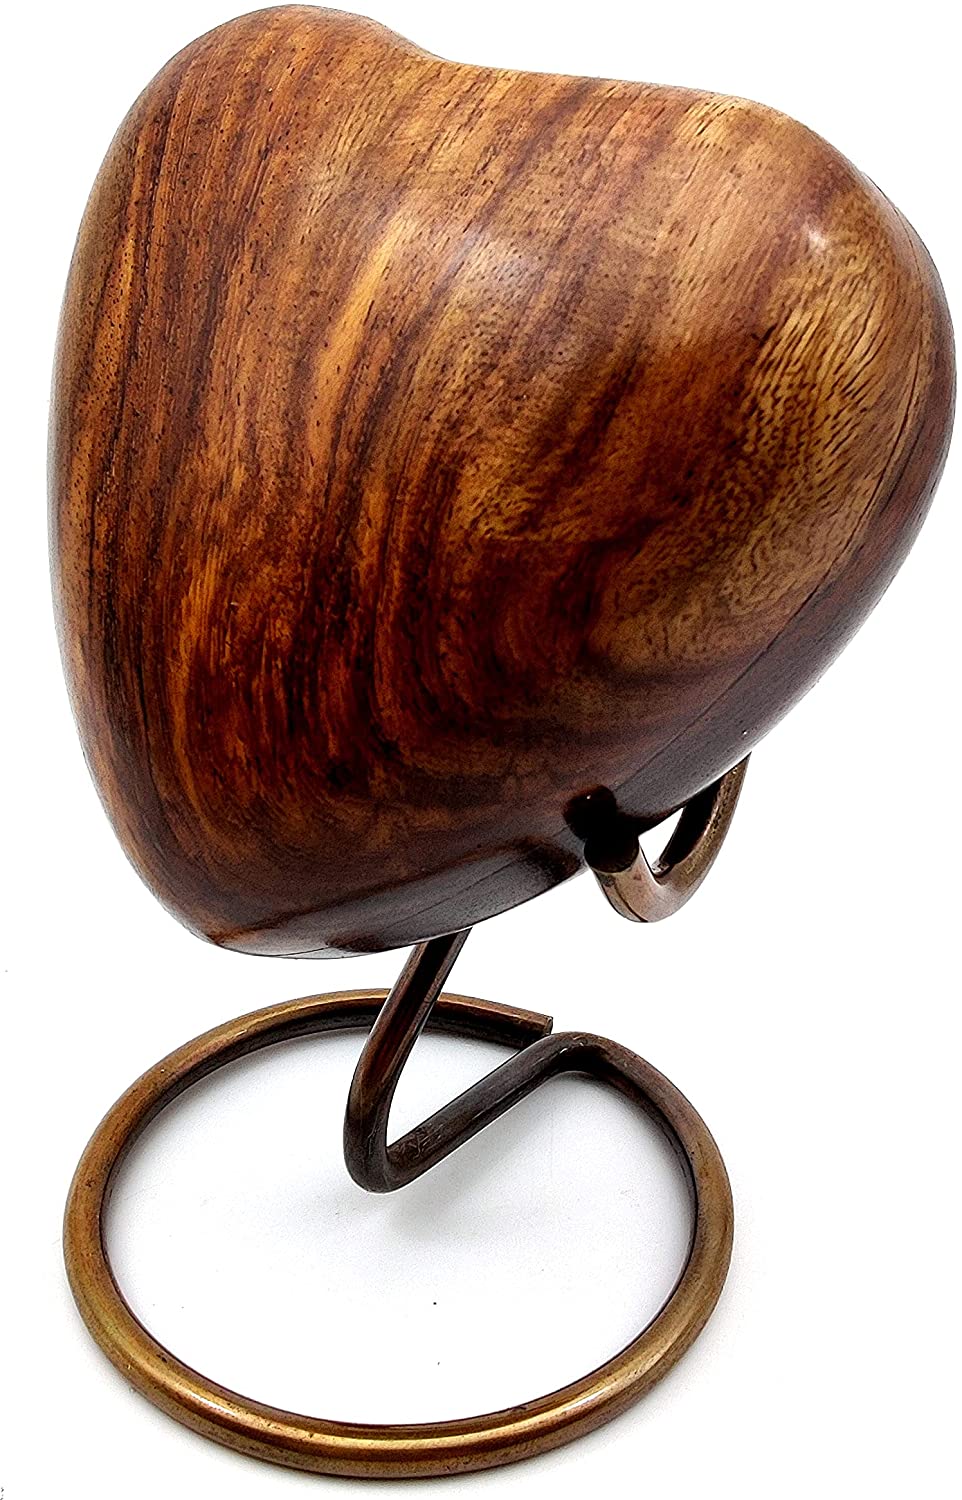 6. Wooden Heart Cremation Urn for Humans and Pets Ashes